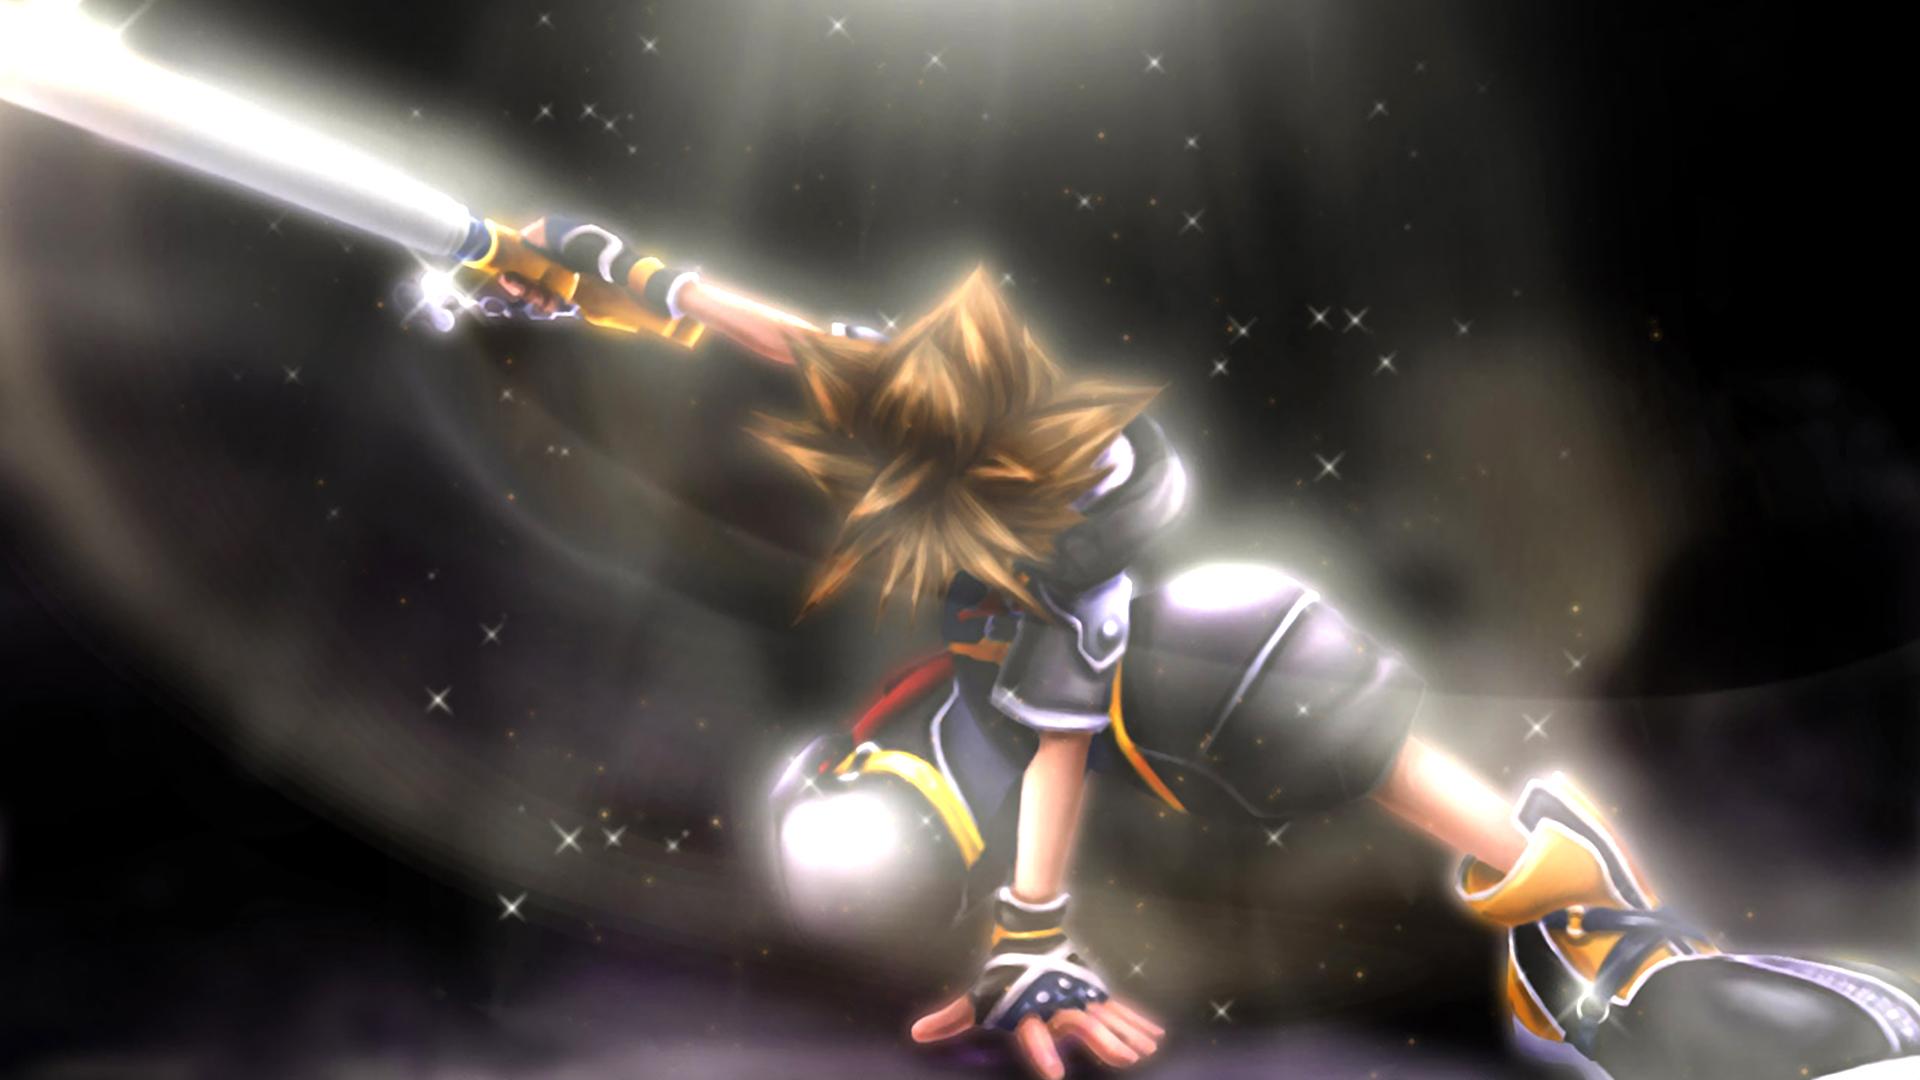 Kingdom Hearts HD Wallpaper and Background Image